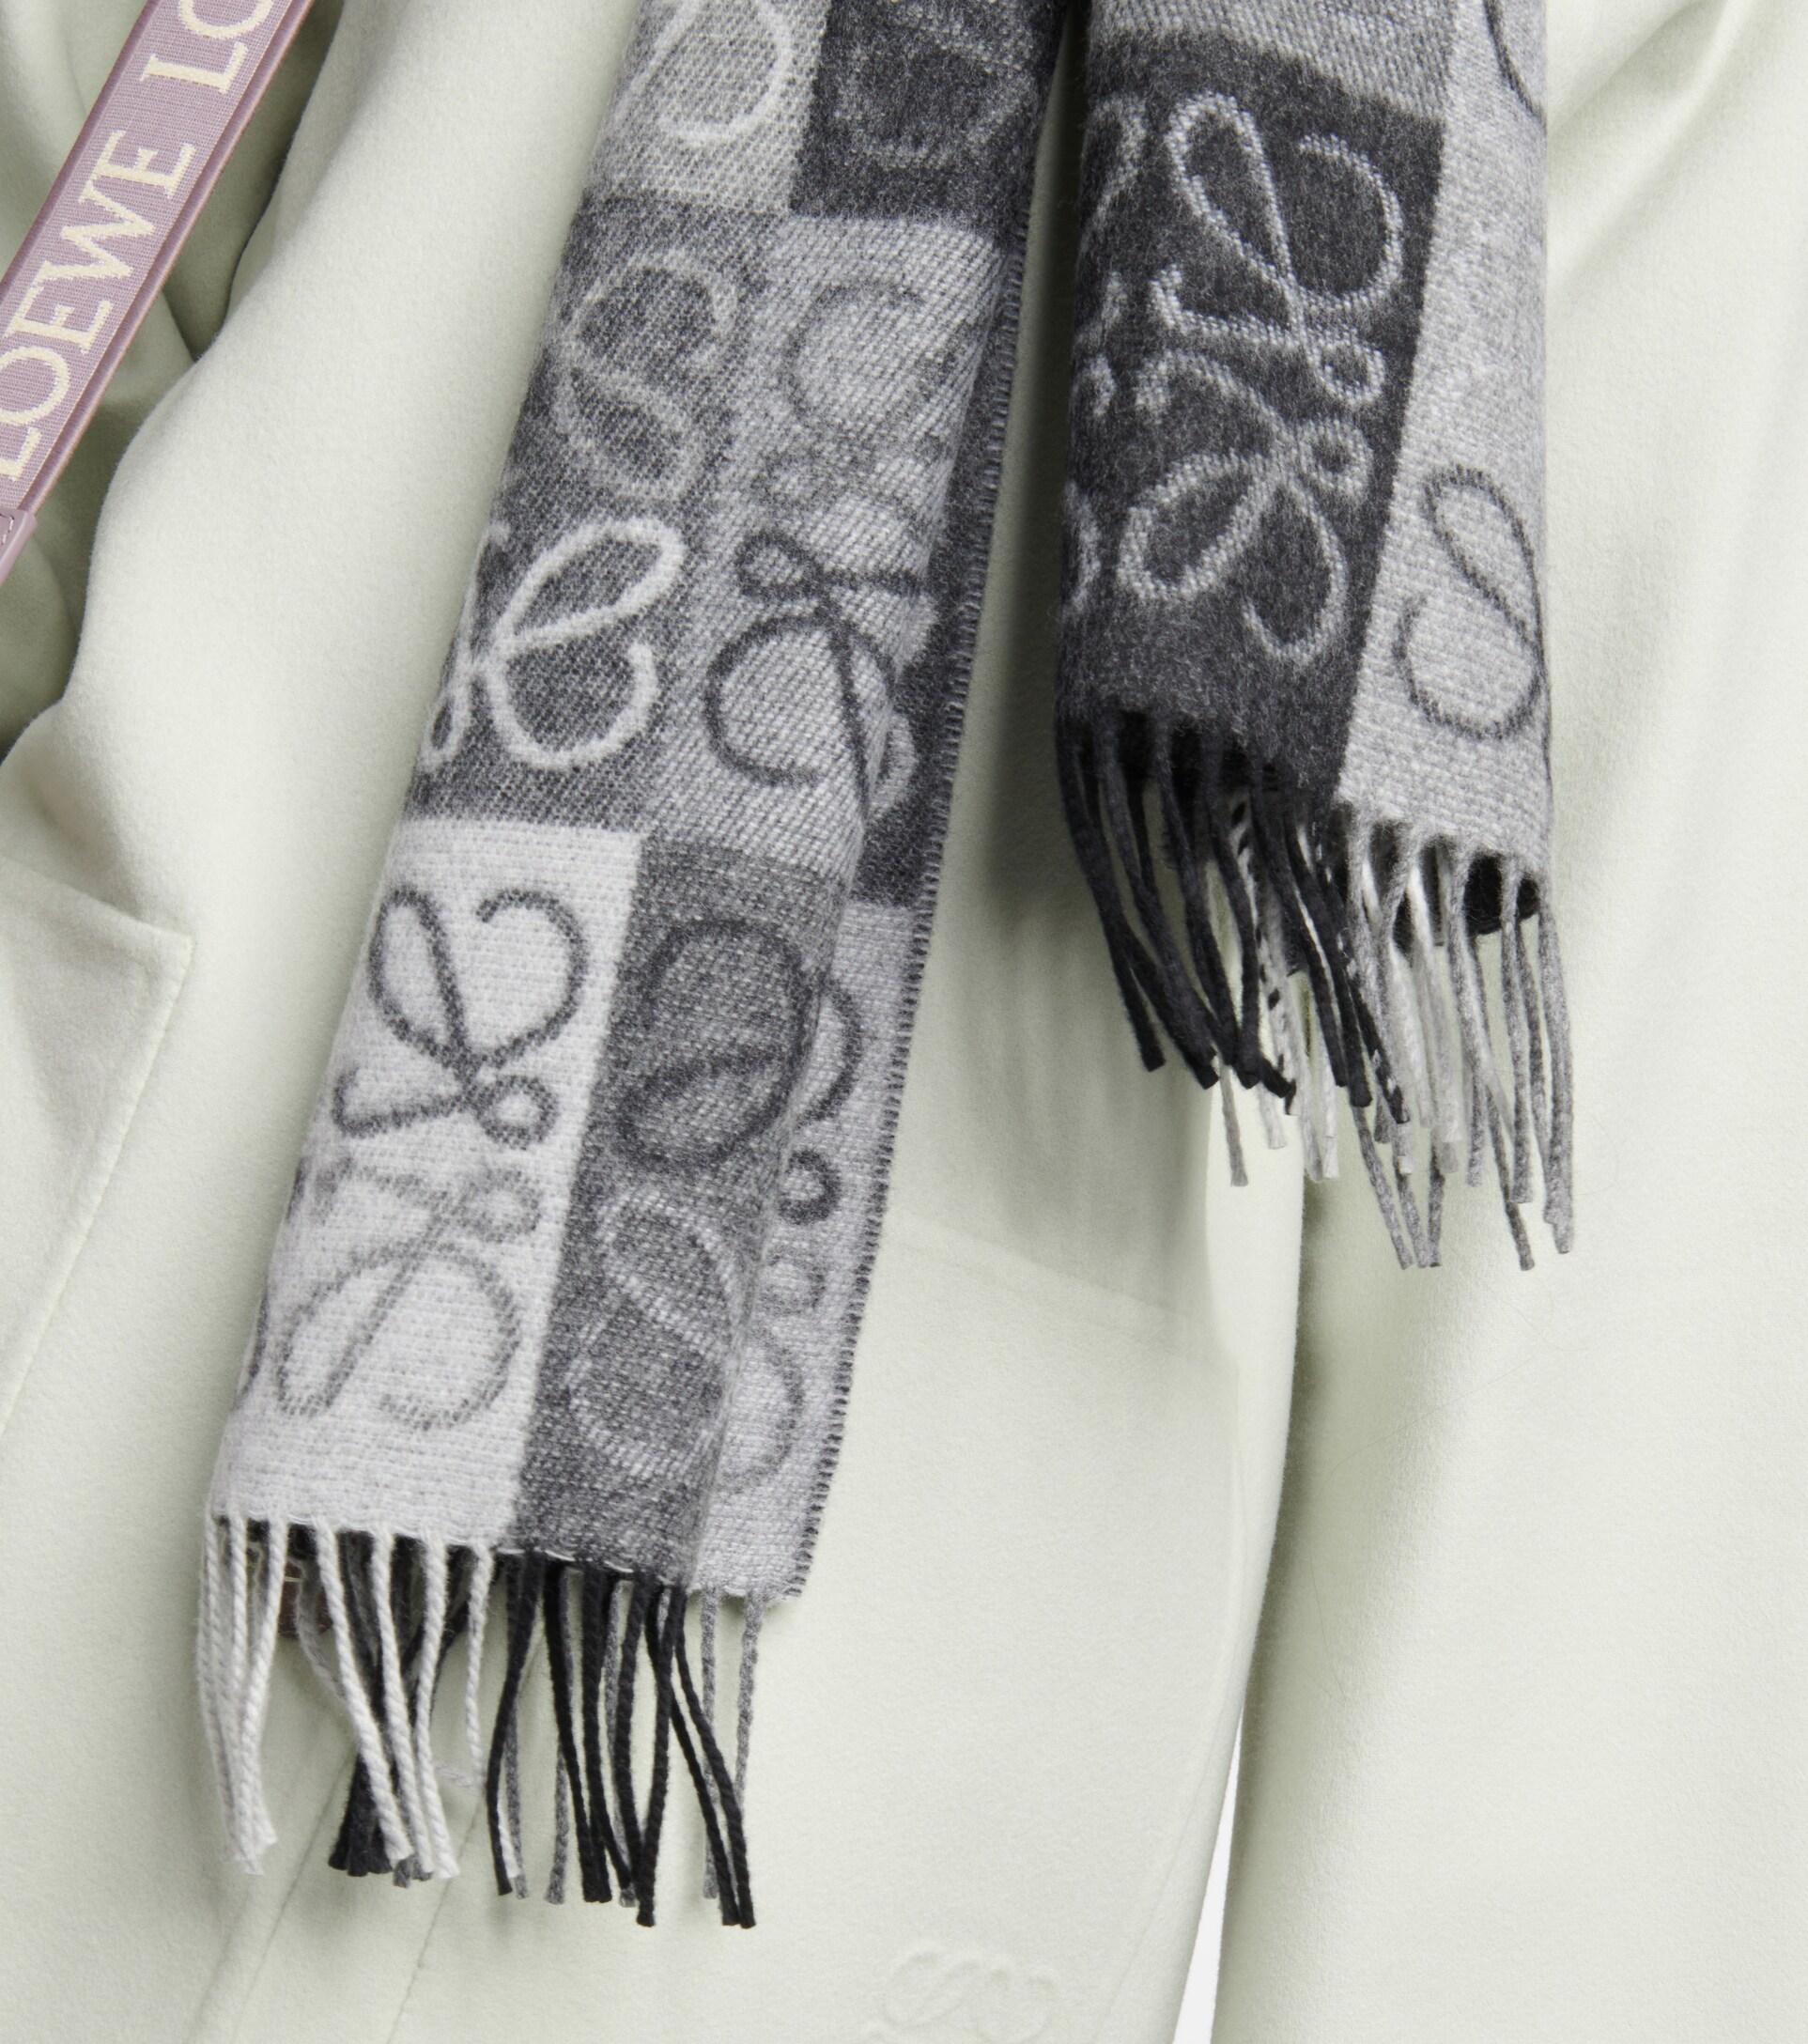 Loewe Anagram Wool And Cashmere Scarf in Gray